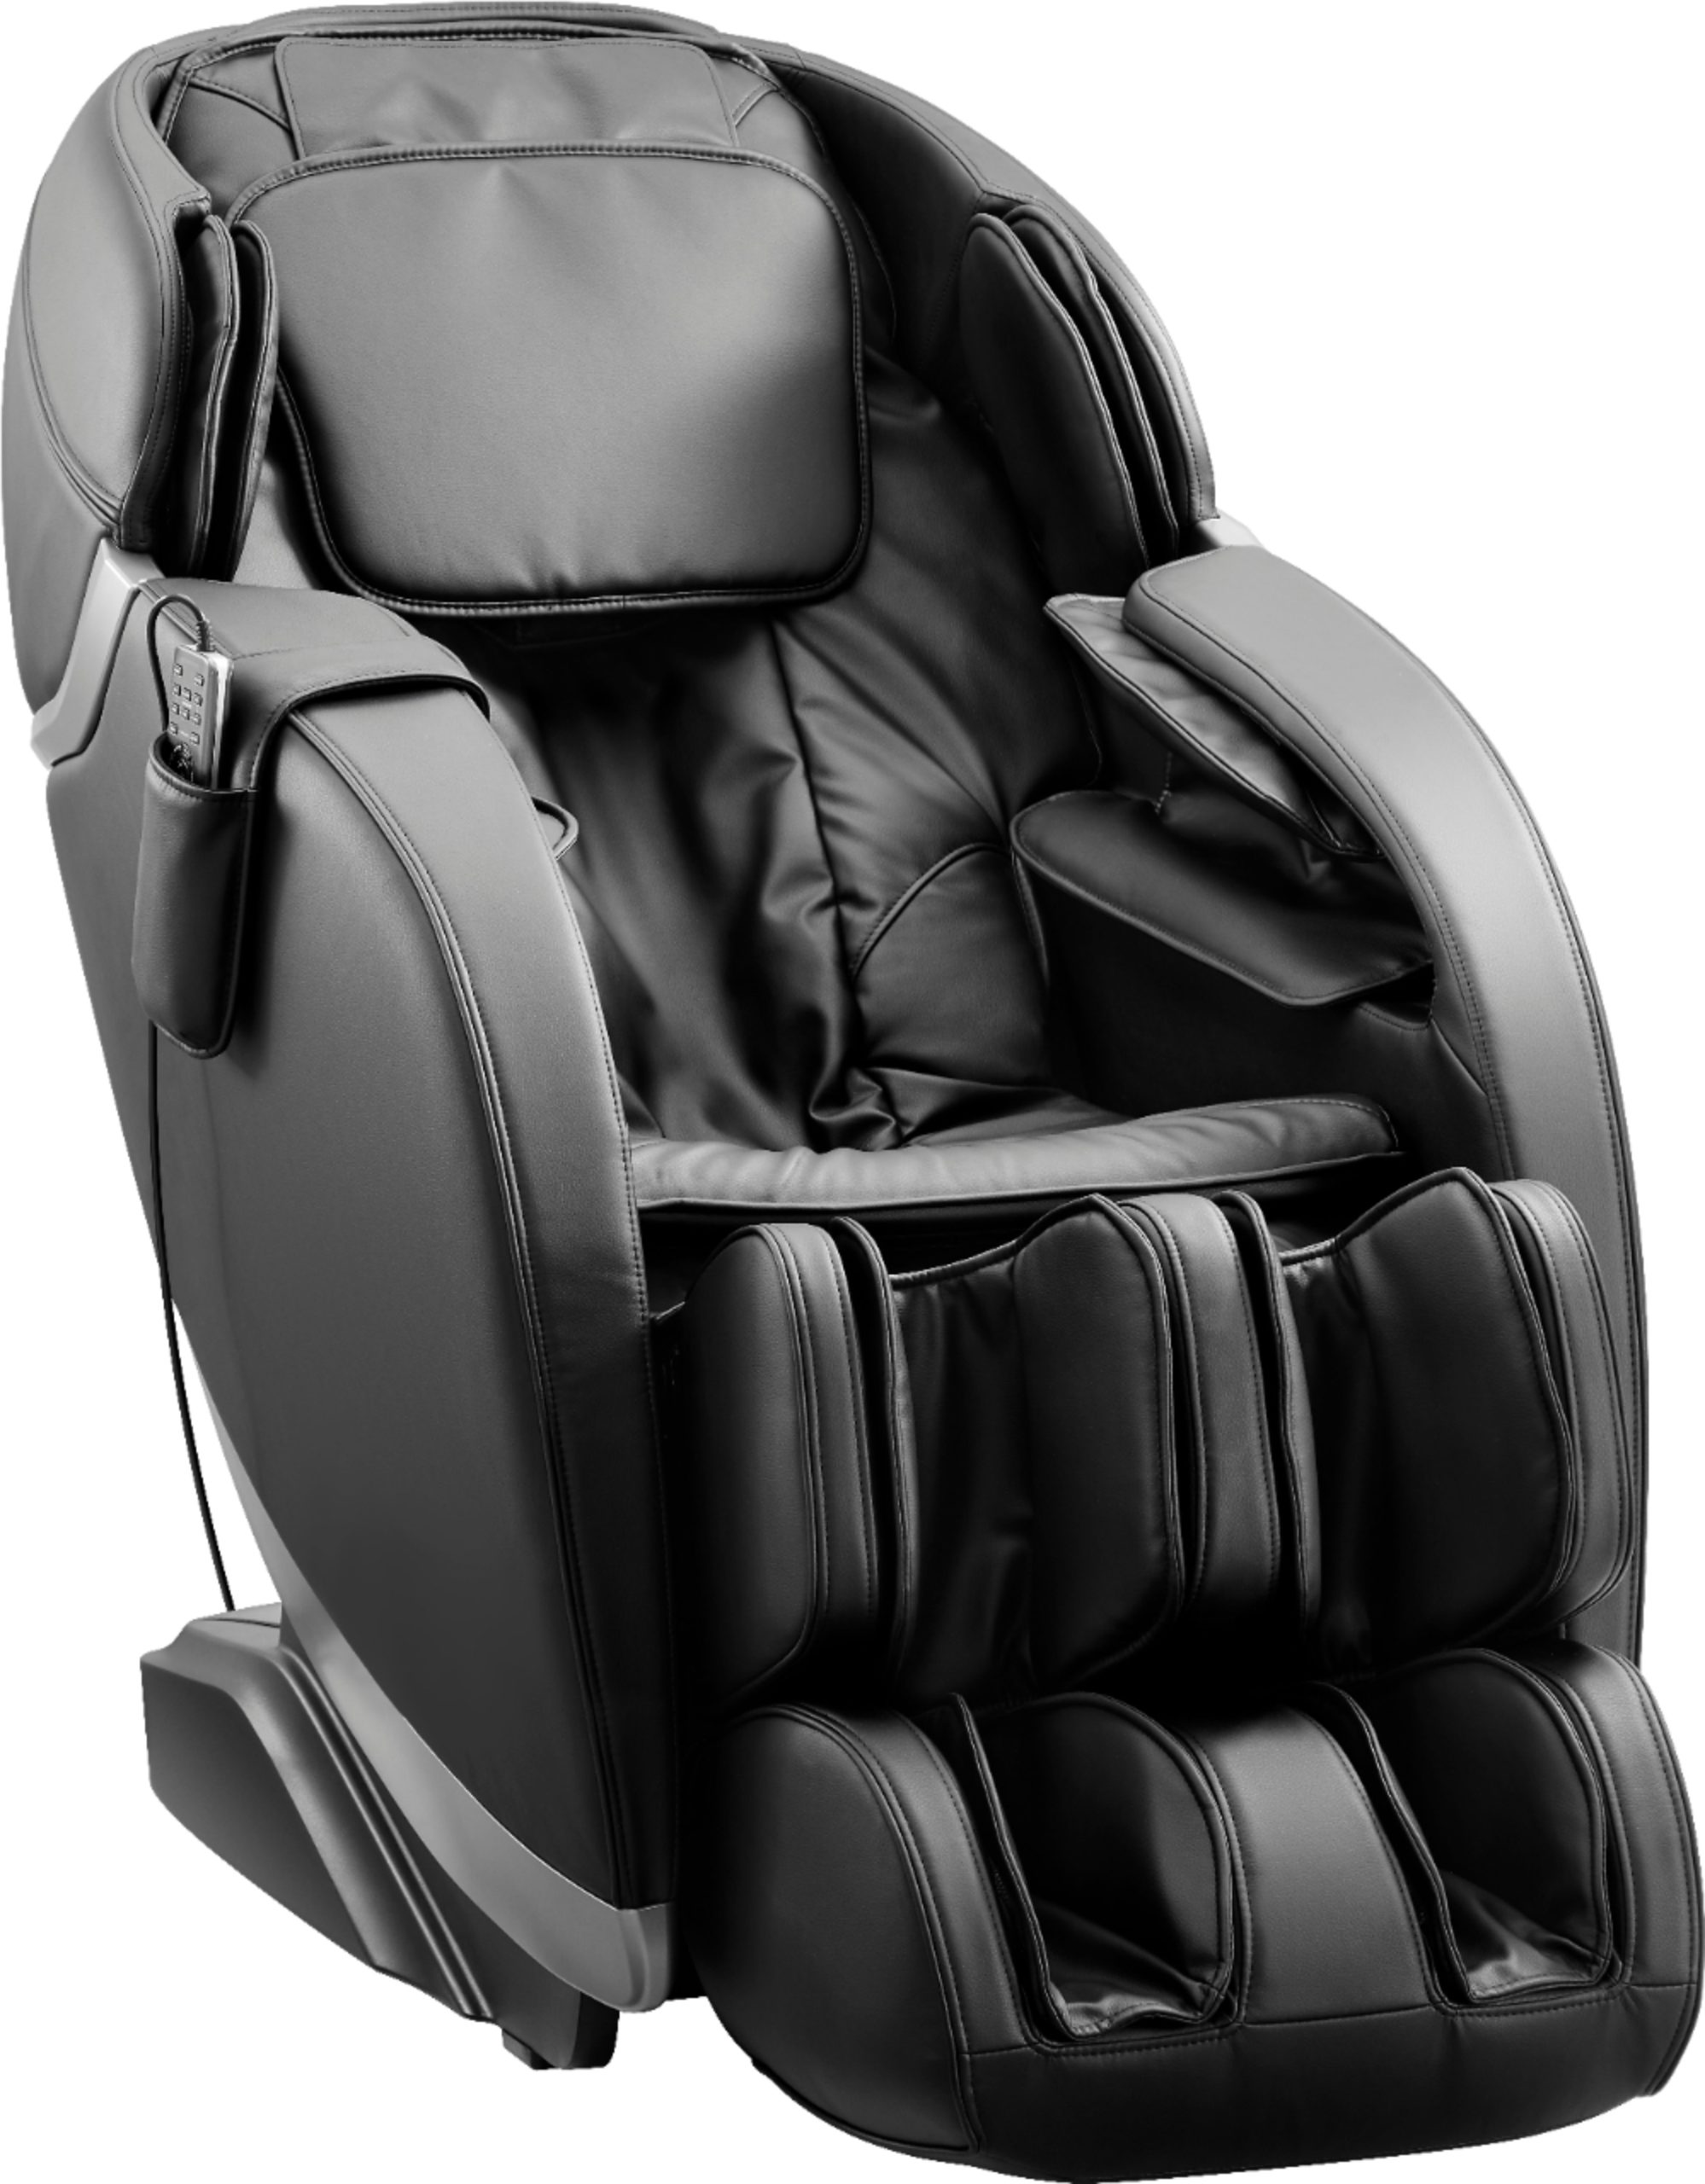 Insignia™ – 2D Zero Gravity Full Body Massage Chair – Black with silver trim – Just $999.99 at Best Buy